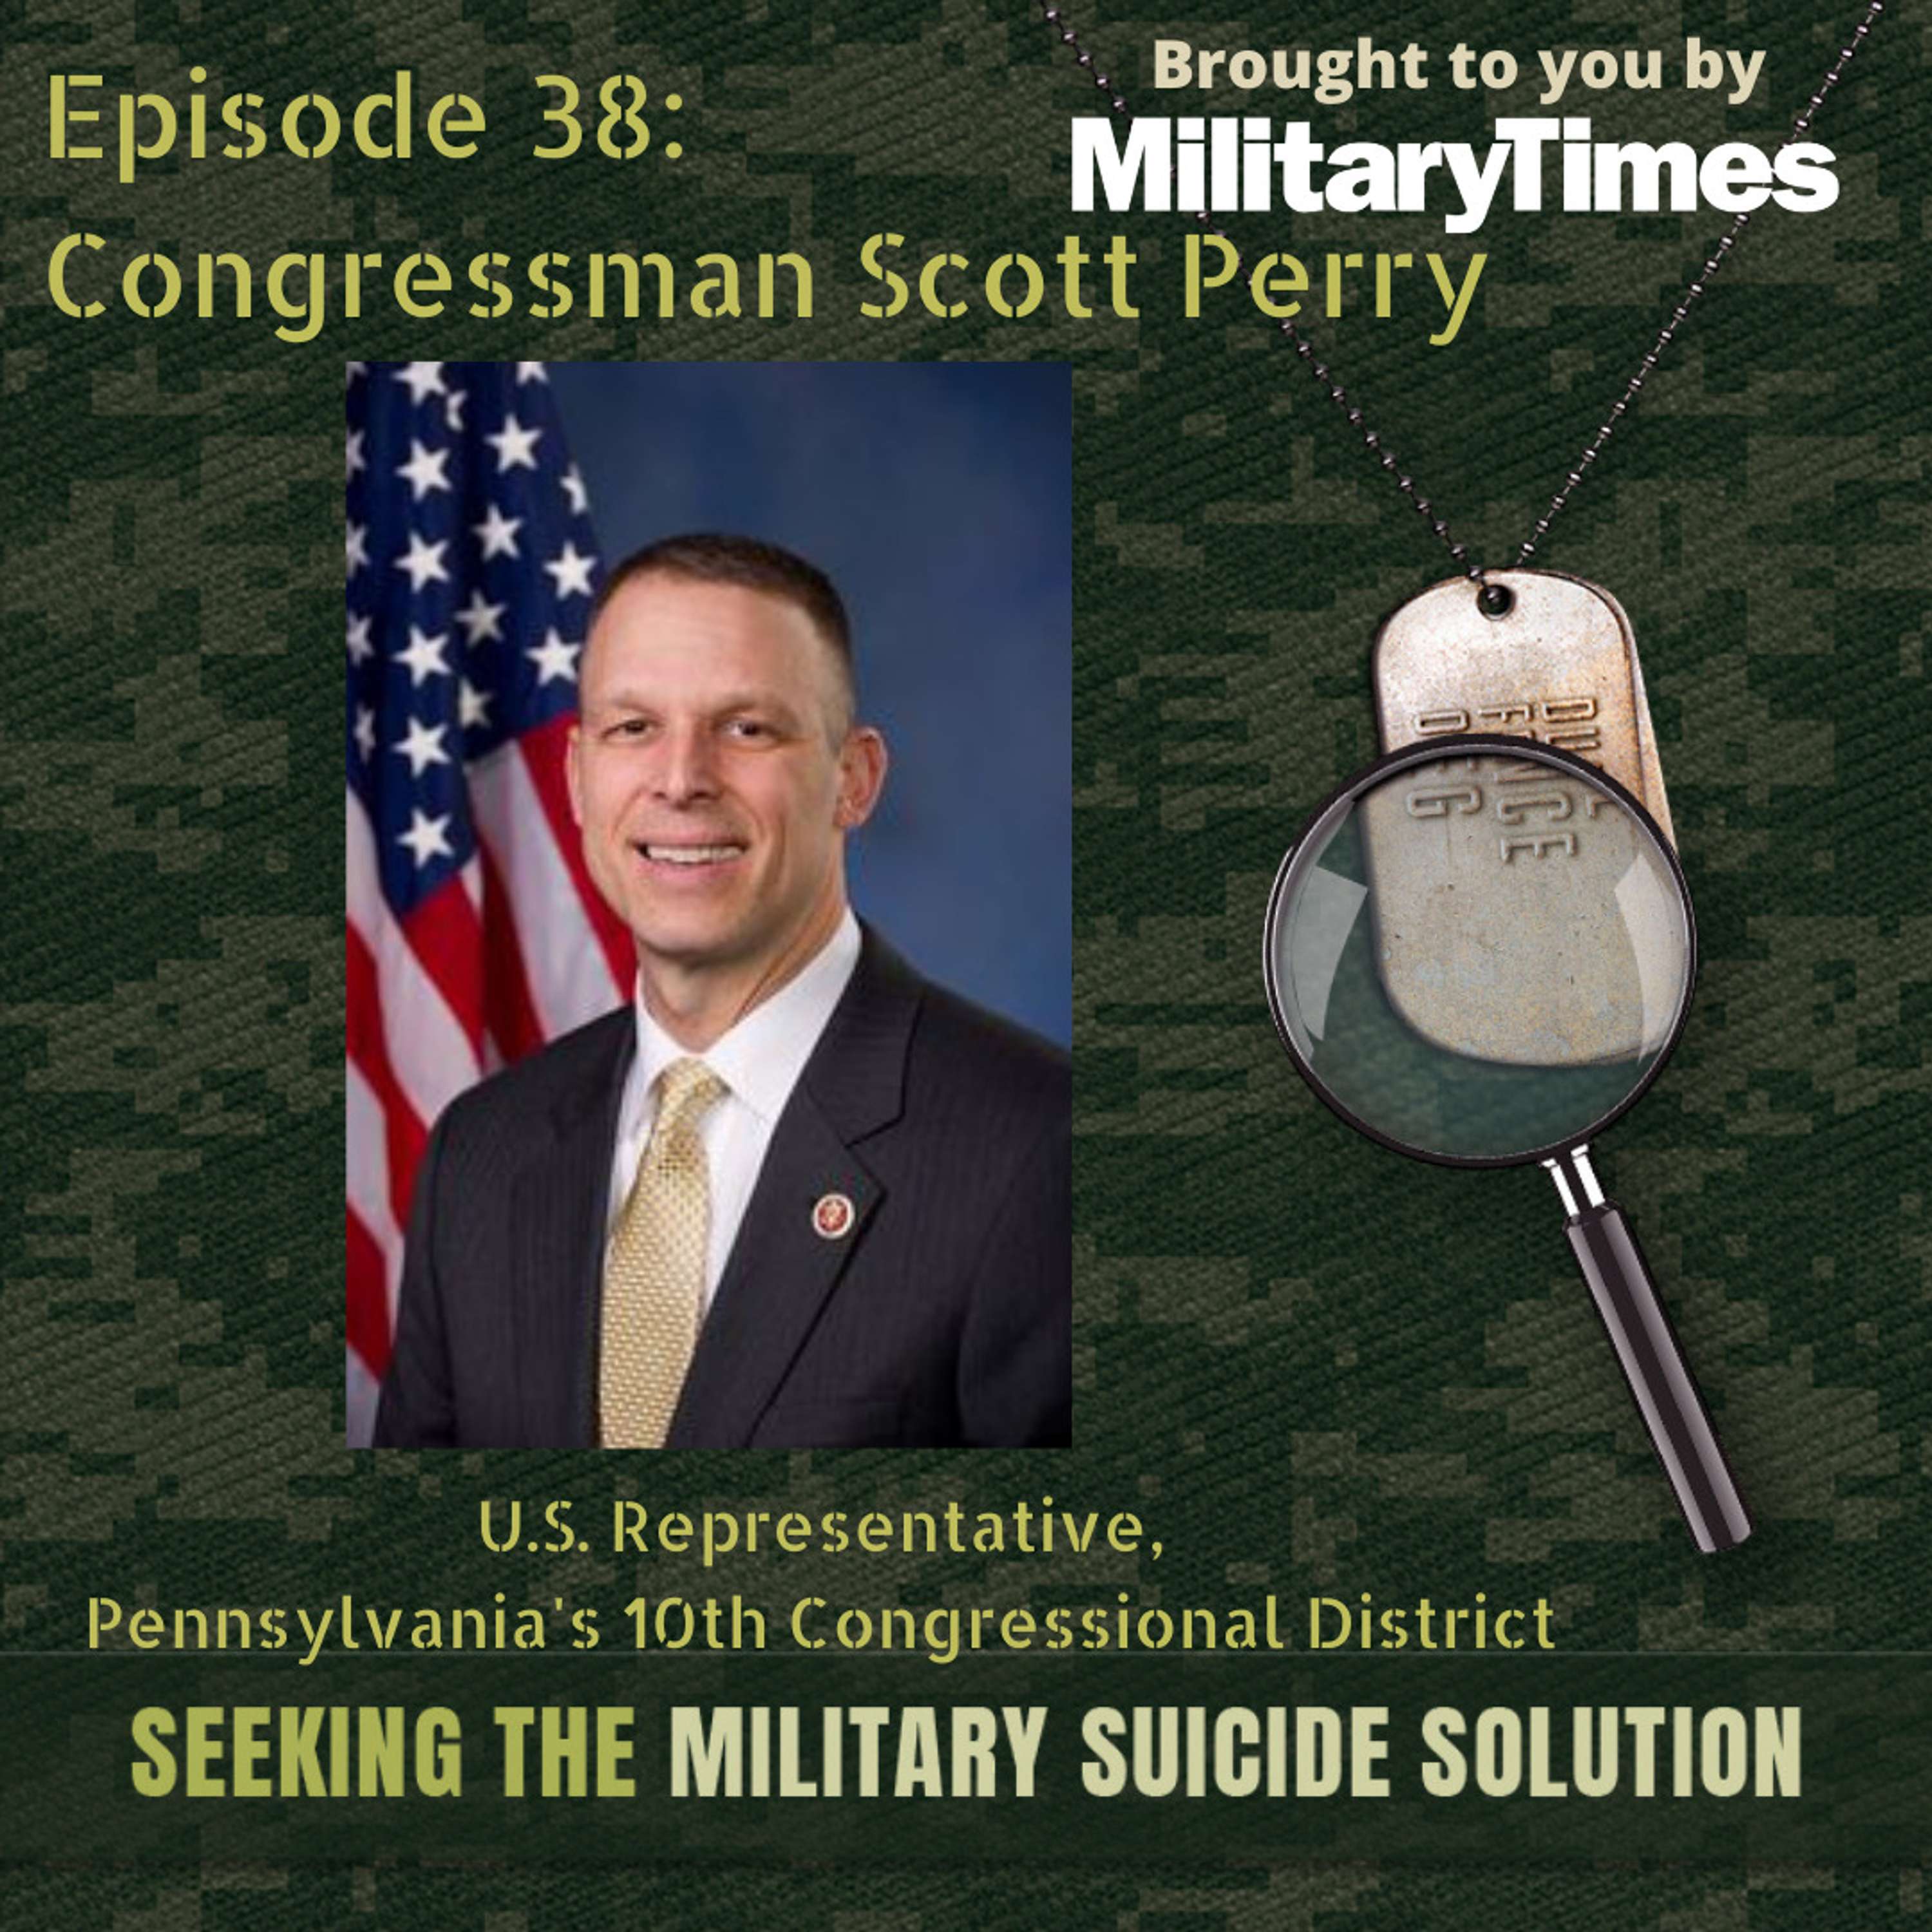 STMSS38 - Congressman Scott Perry - Legislative and Policy Approach to Suicide Prevention